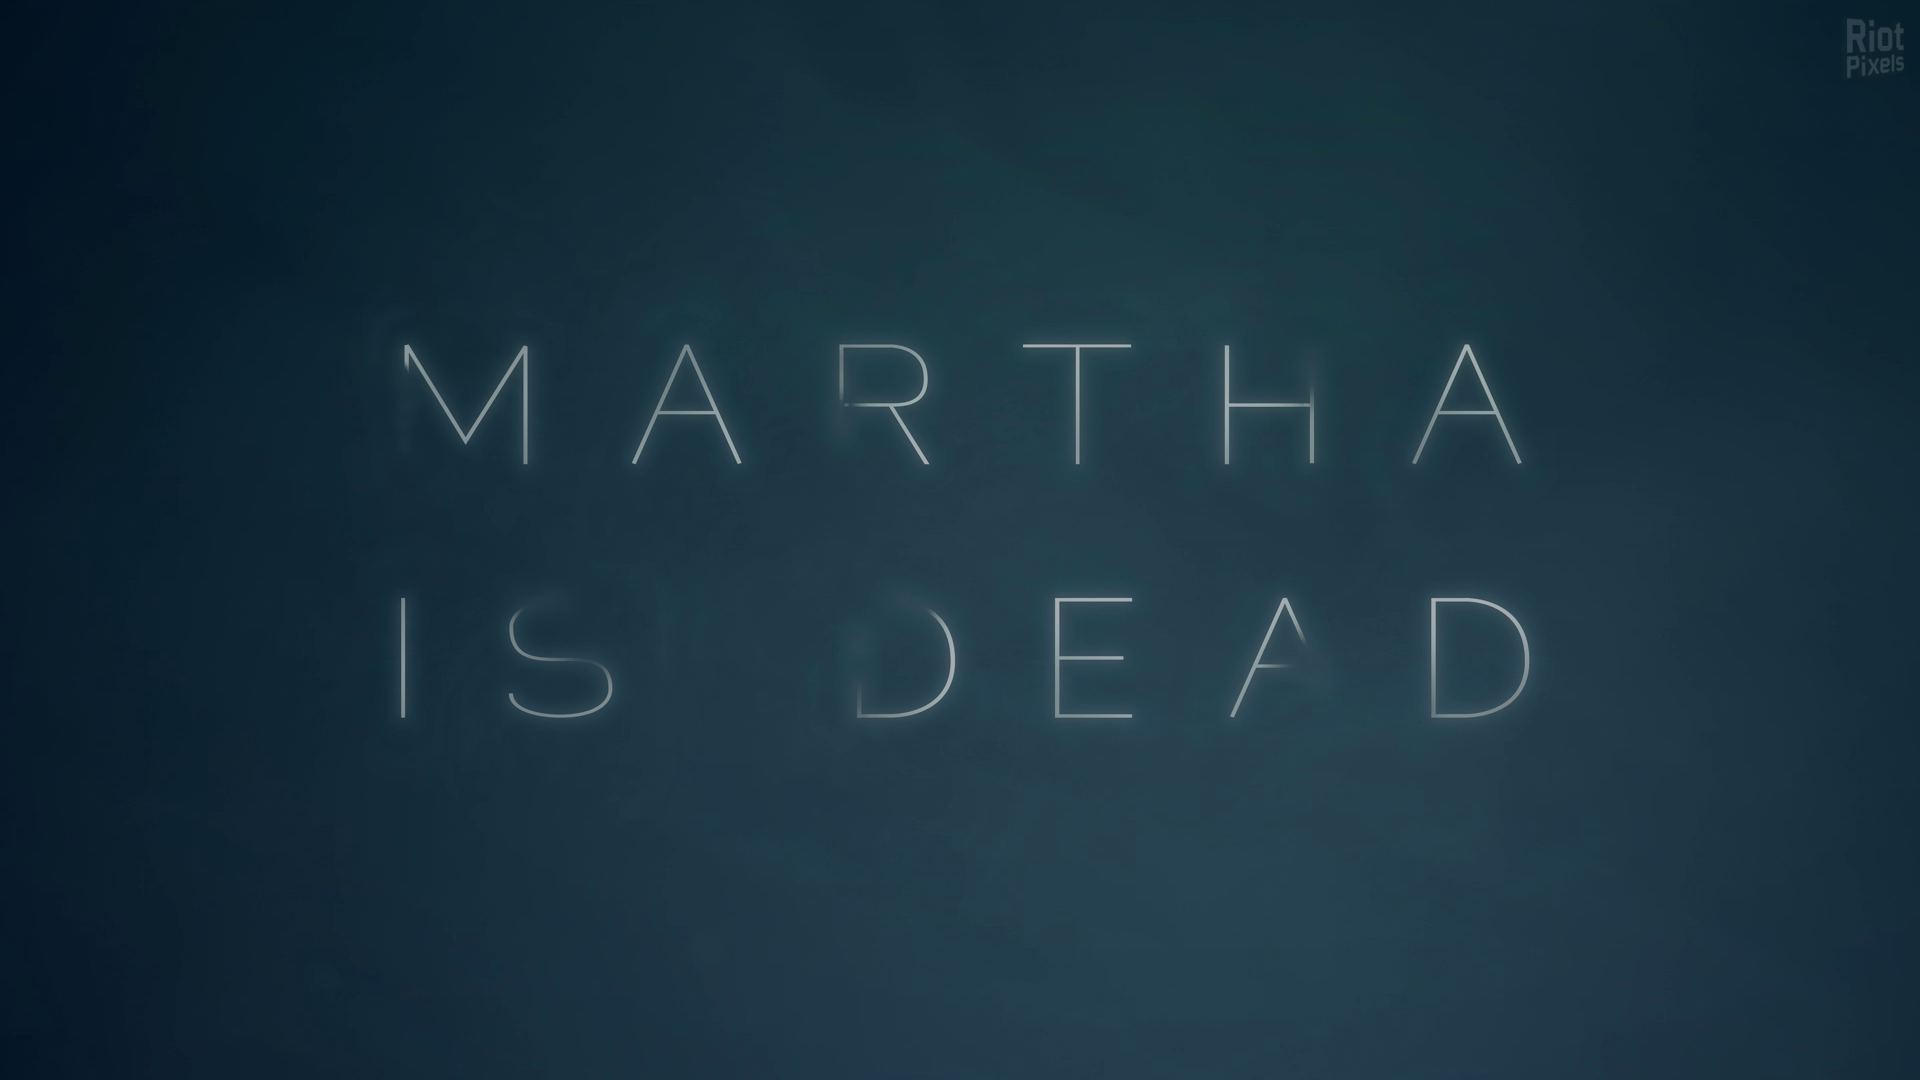 Martha is Dead, The Town of Light, Martha is Dead PlayStation, Horror PlayStation 5, Martha is Dead Wallpaper